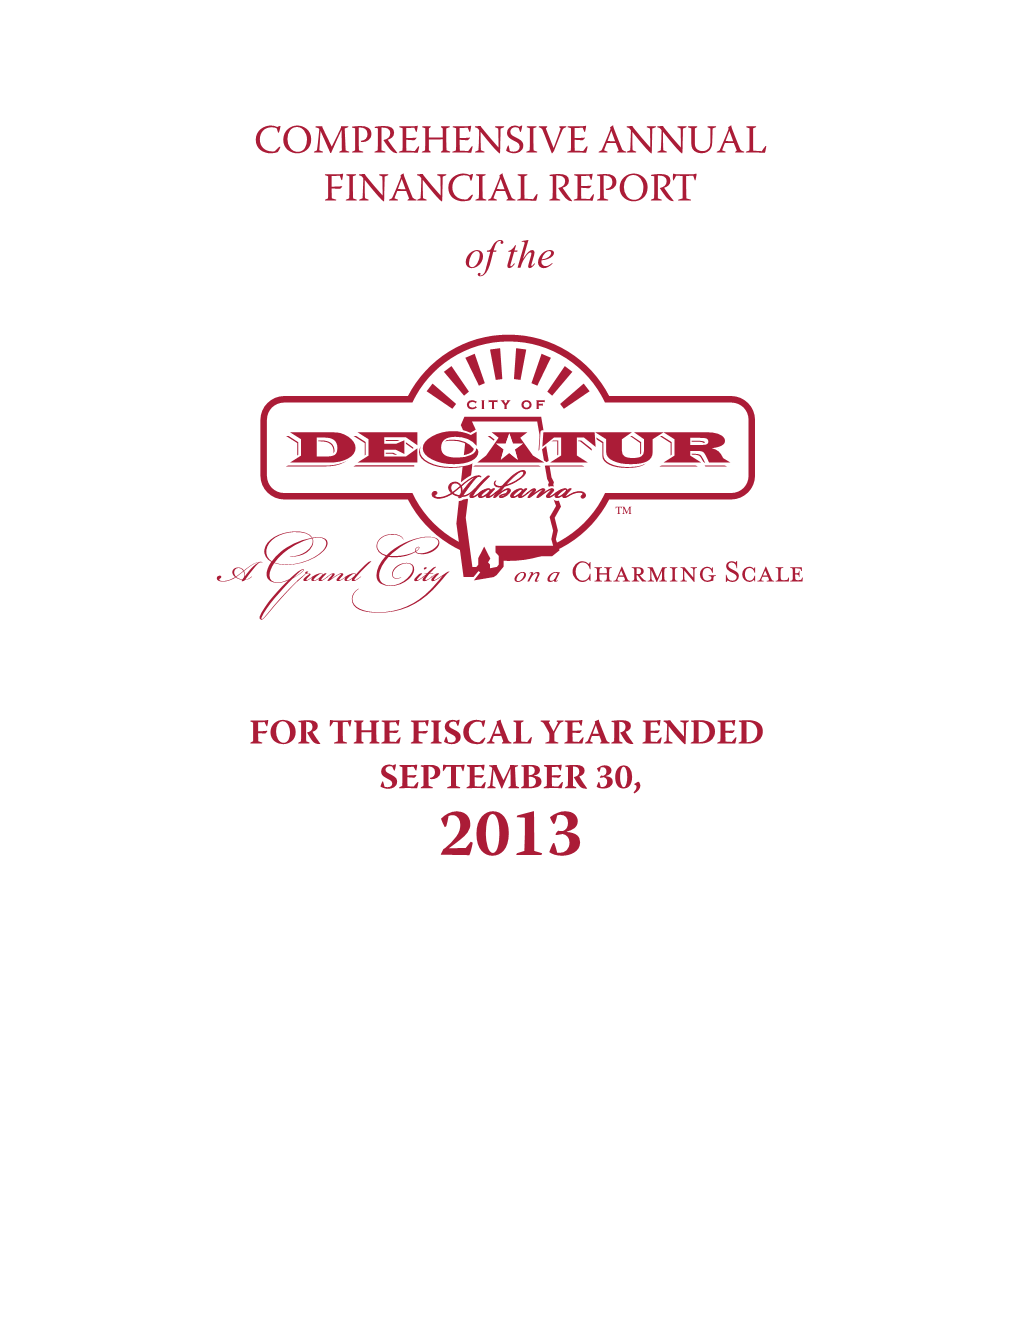 COMPREHENSIVE ANNUAL FINANCIAL REPORT of The